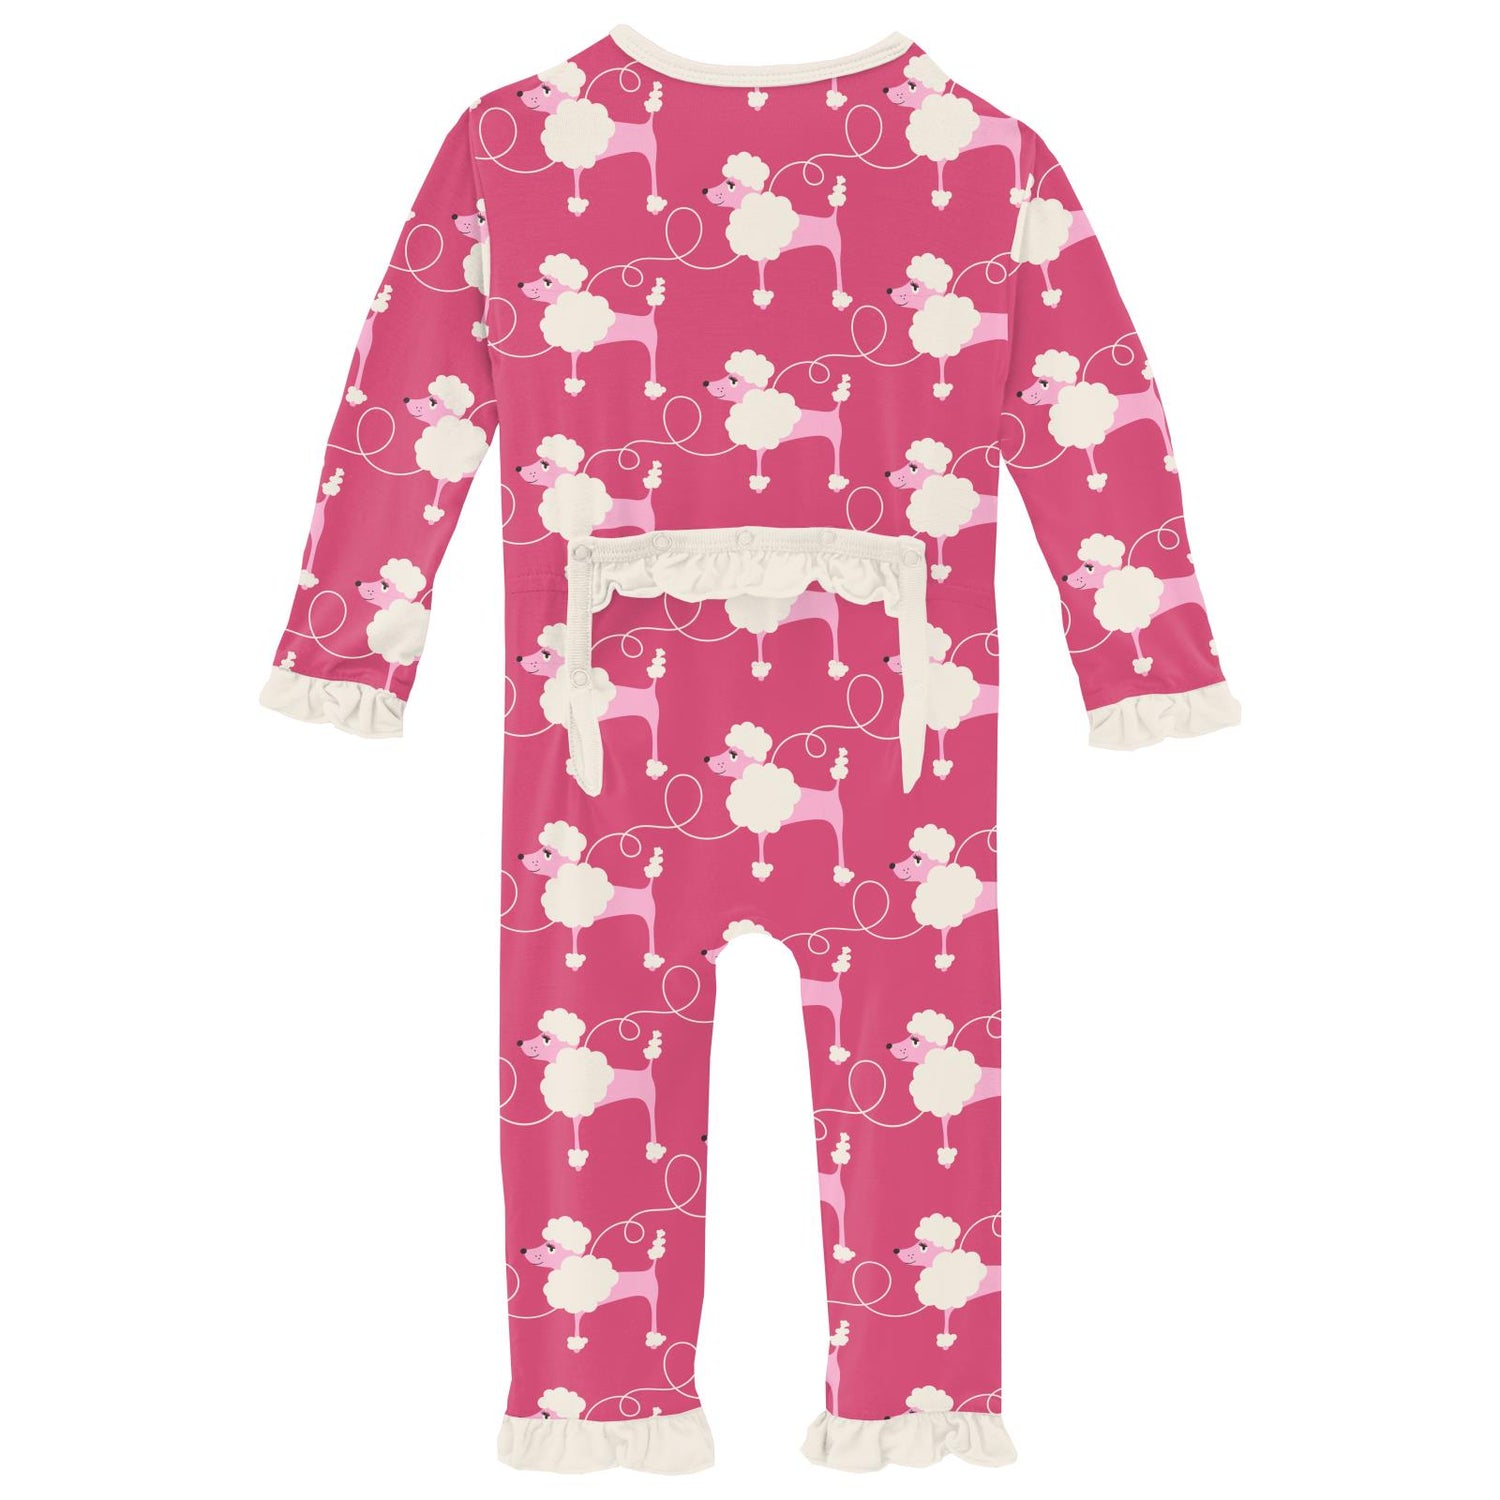 Print Classic Ruffle Coverall with Snaps in Flamingo Poodles